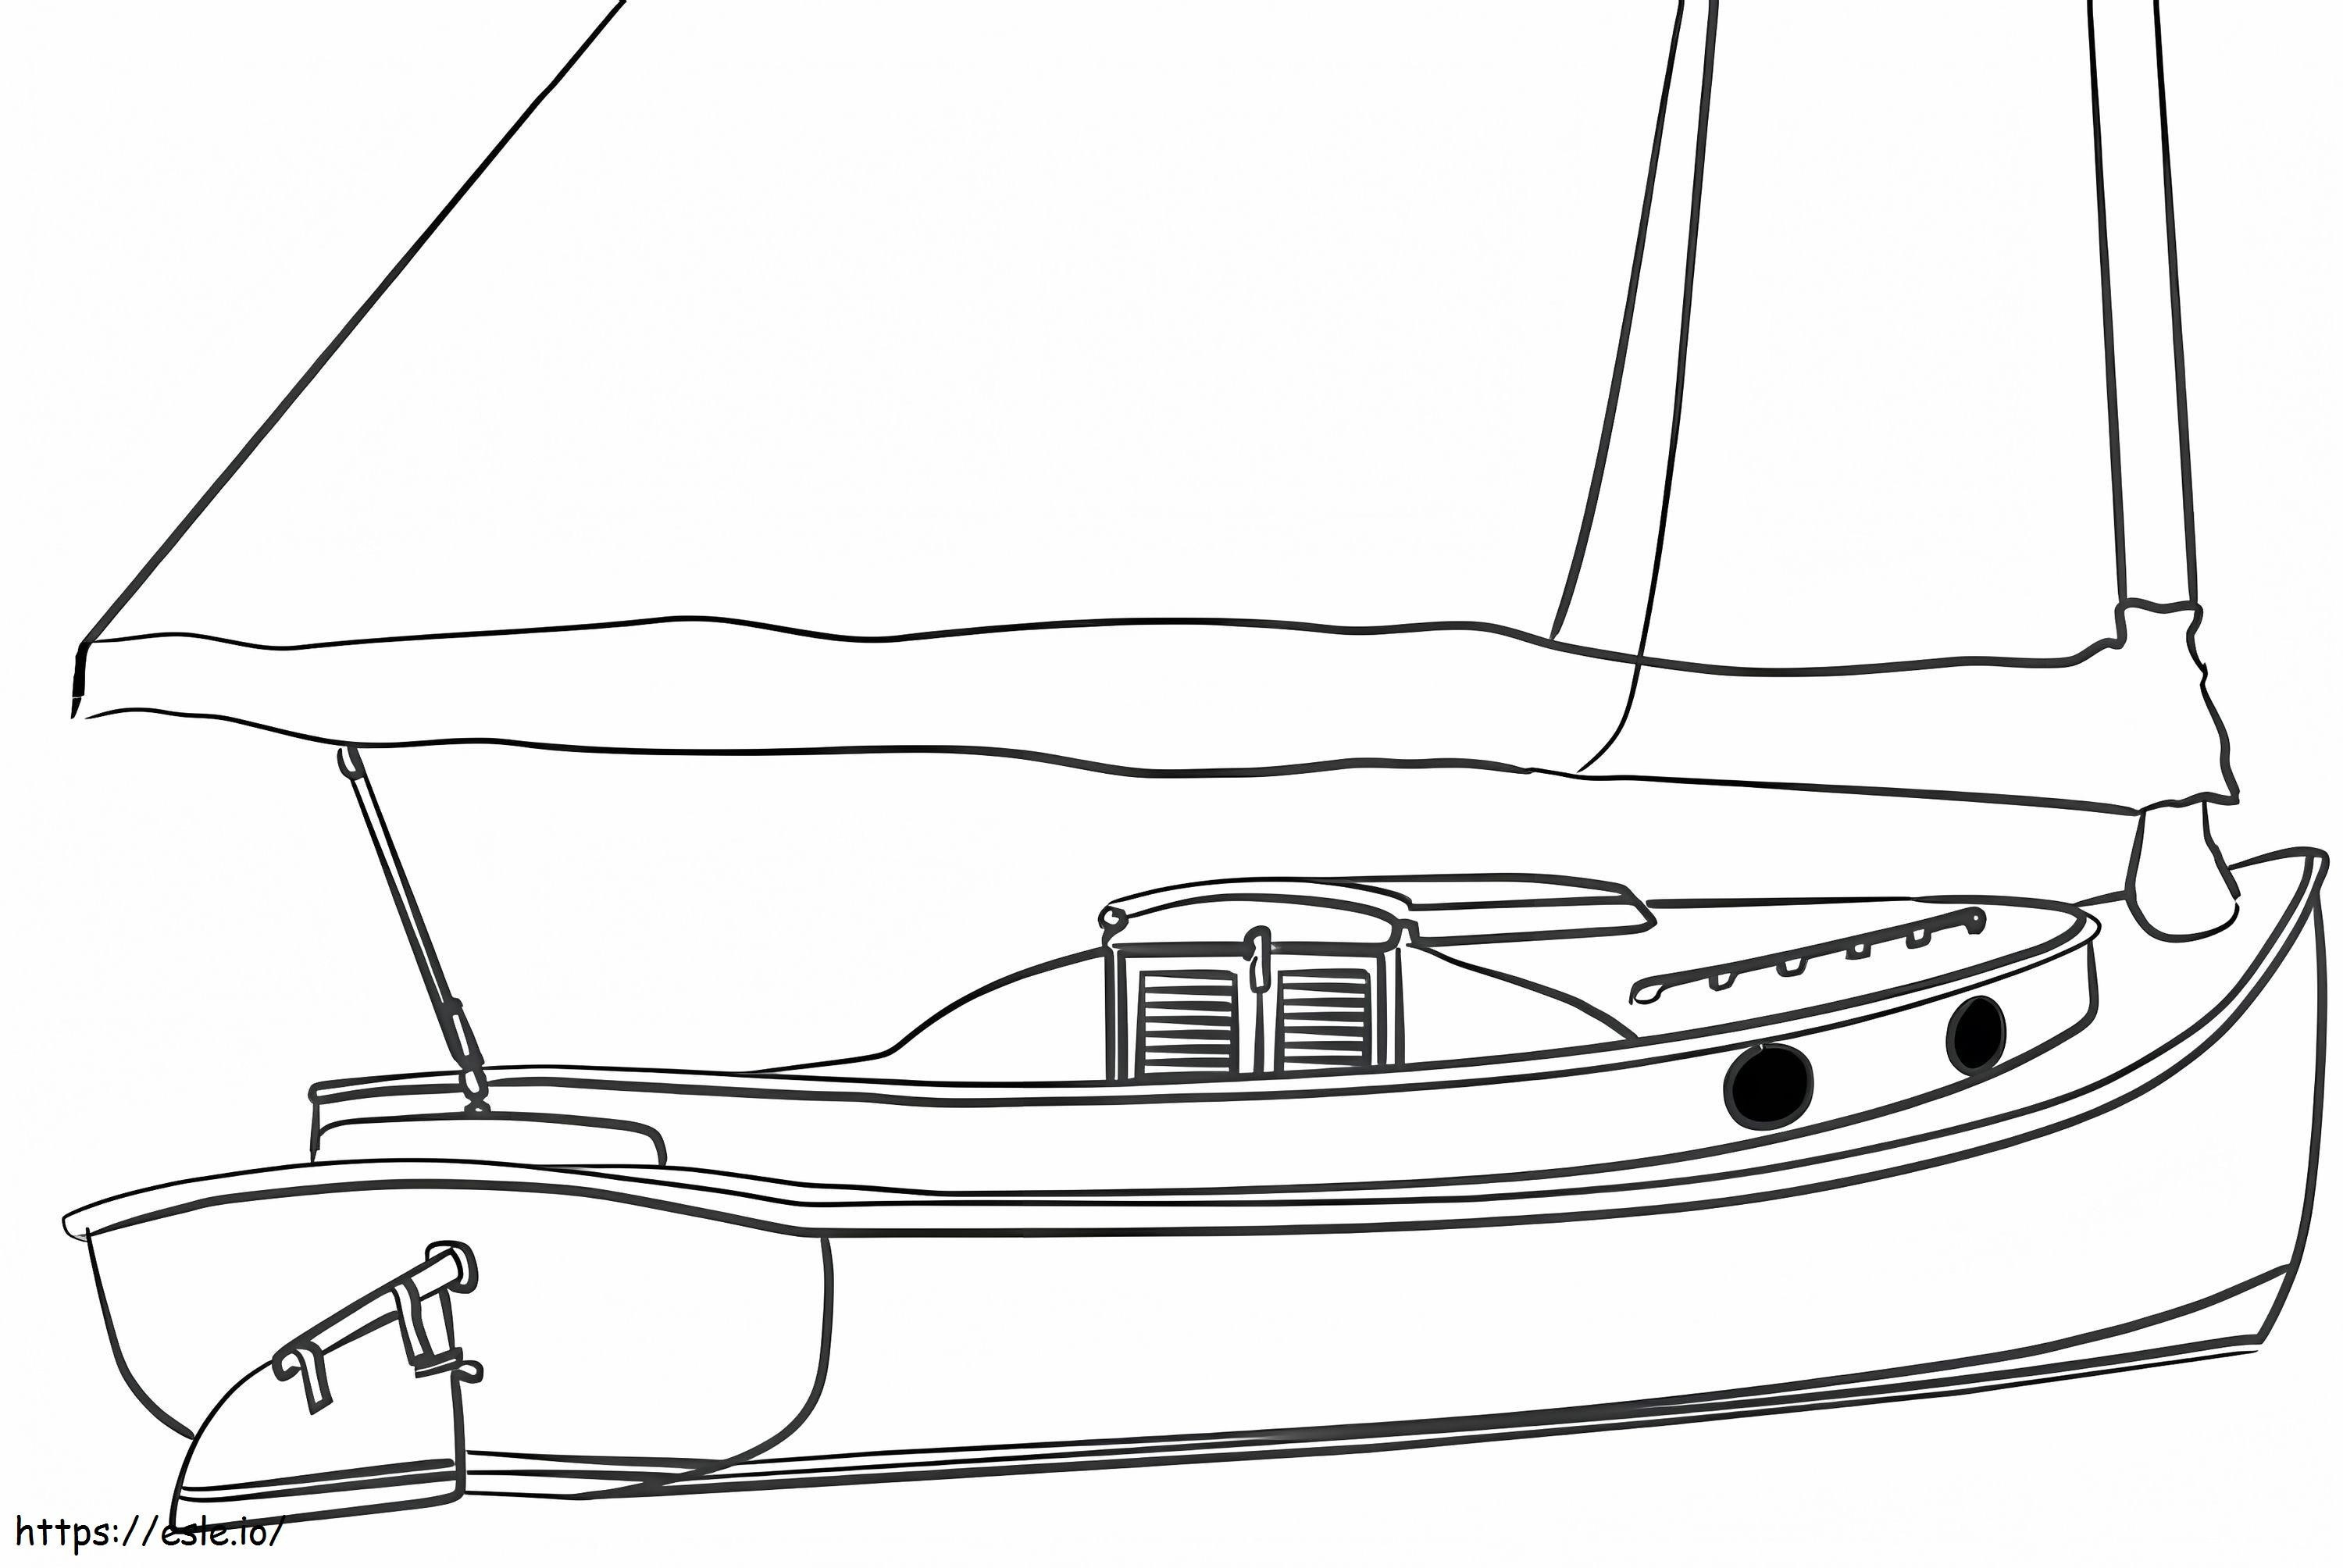 Catboat coloring page